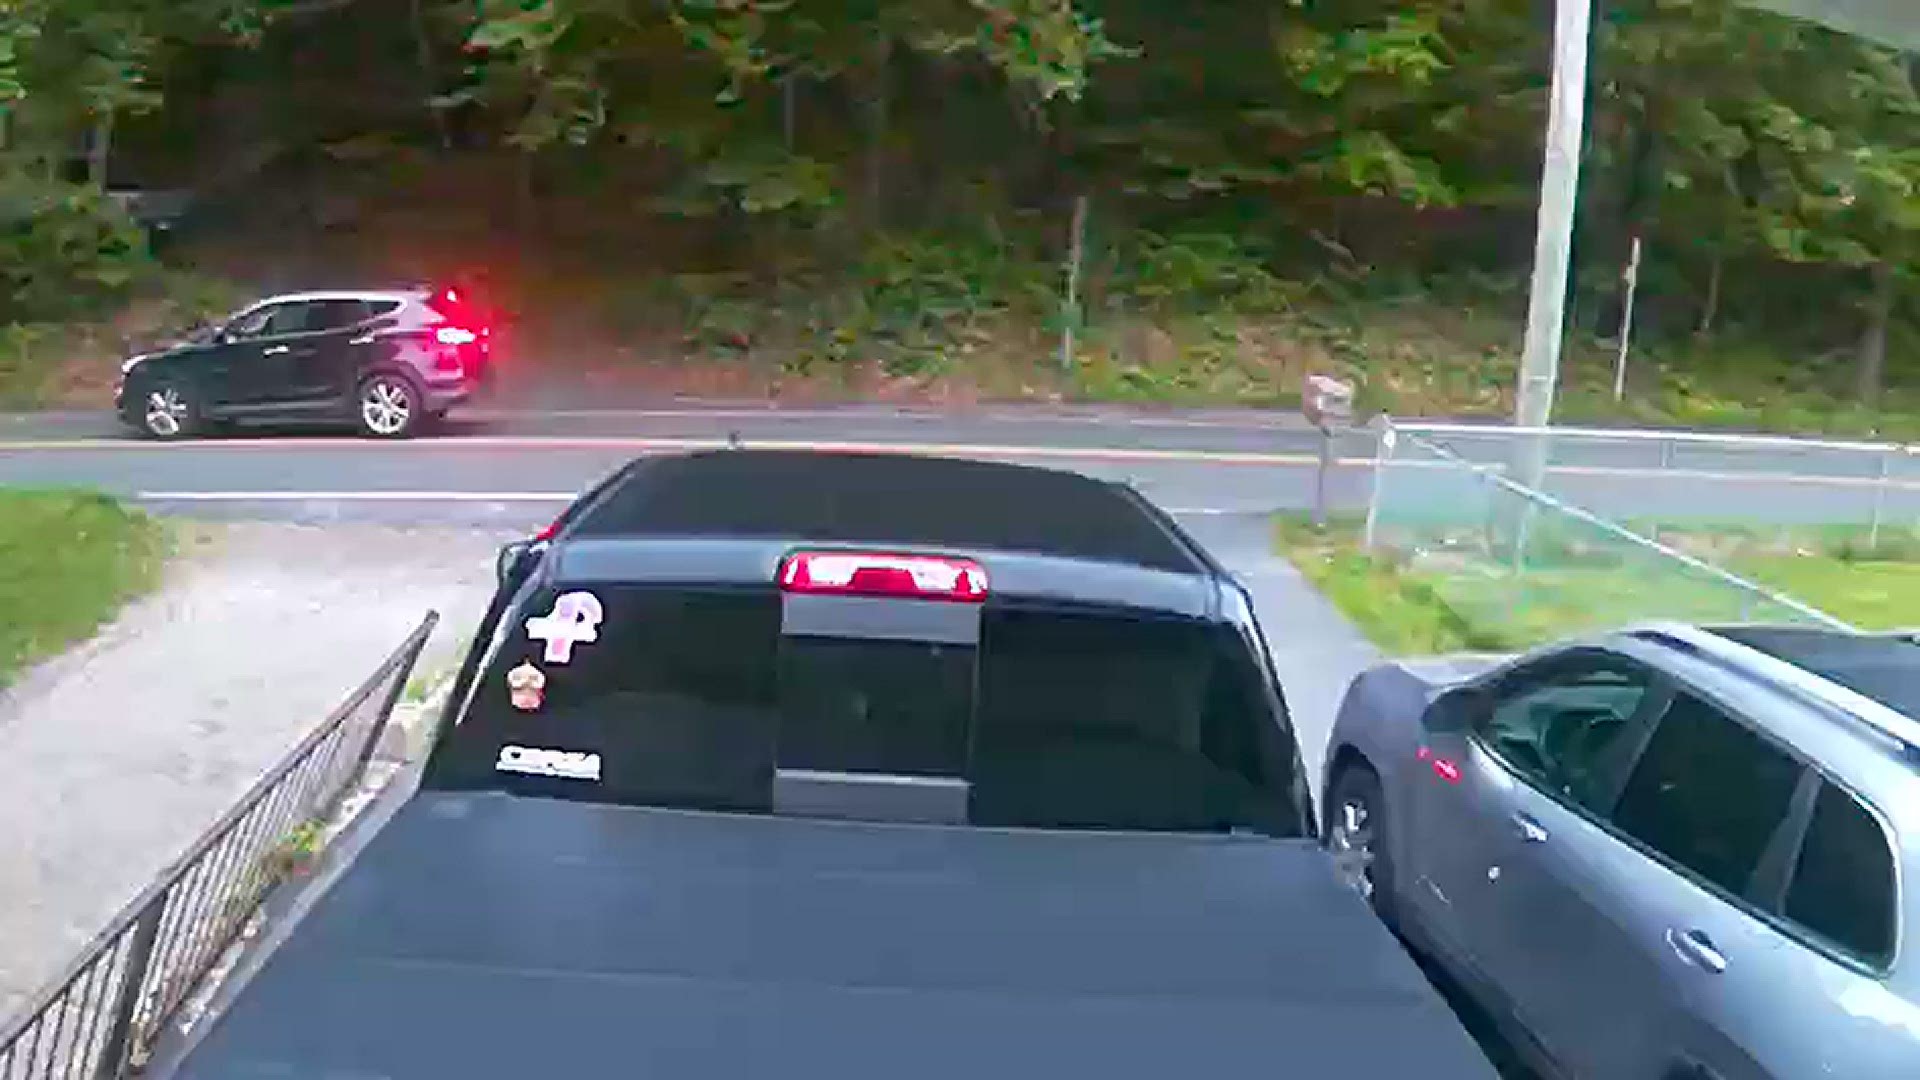 Video from Seymour Police shows two young men rummaging through vehicles in town. It takes seconds for them to get away.